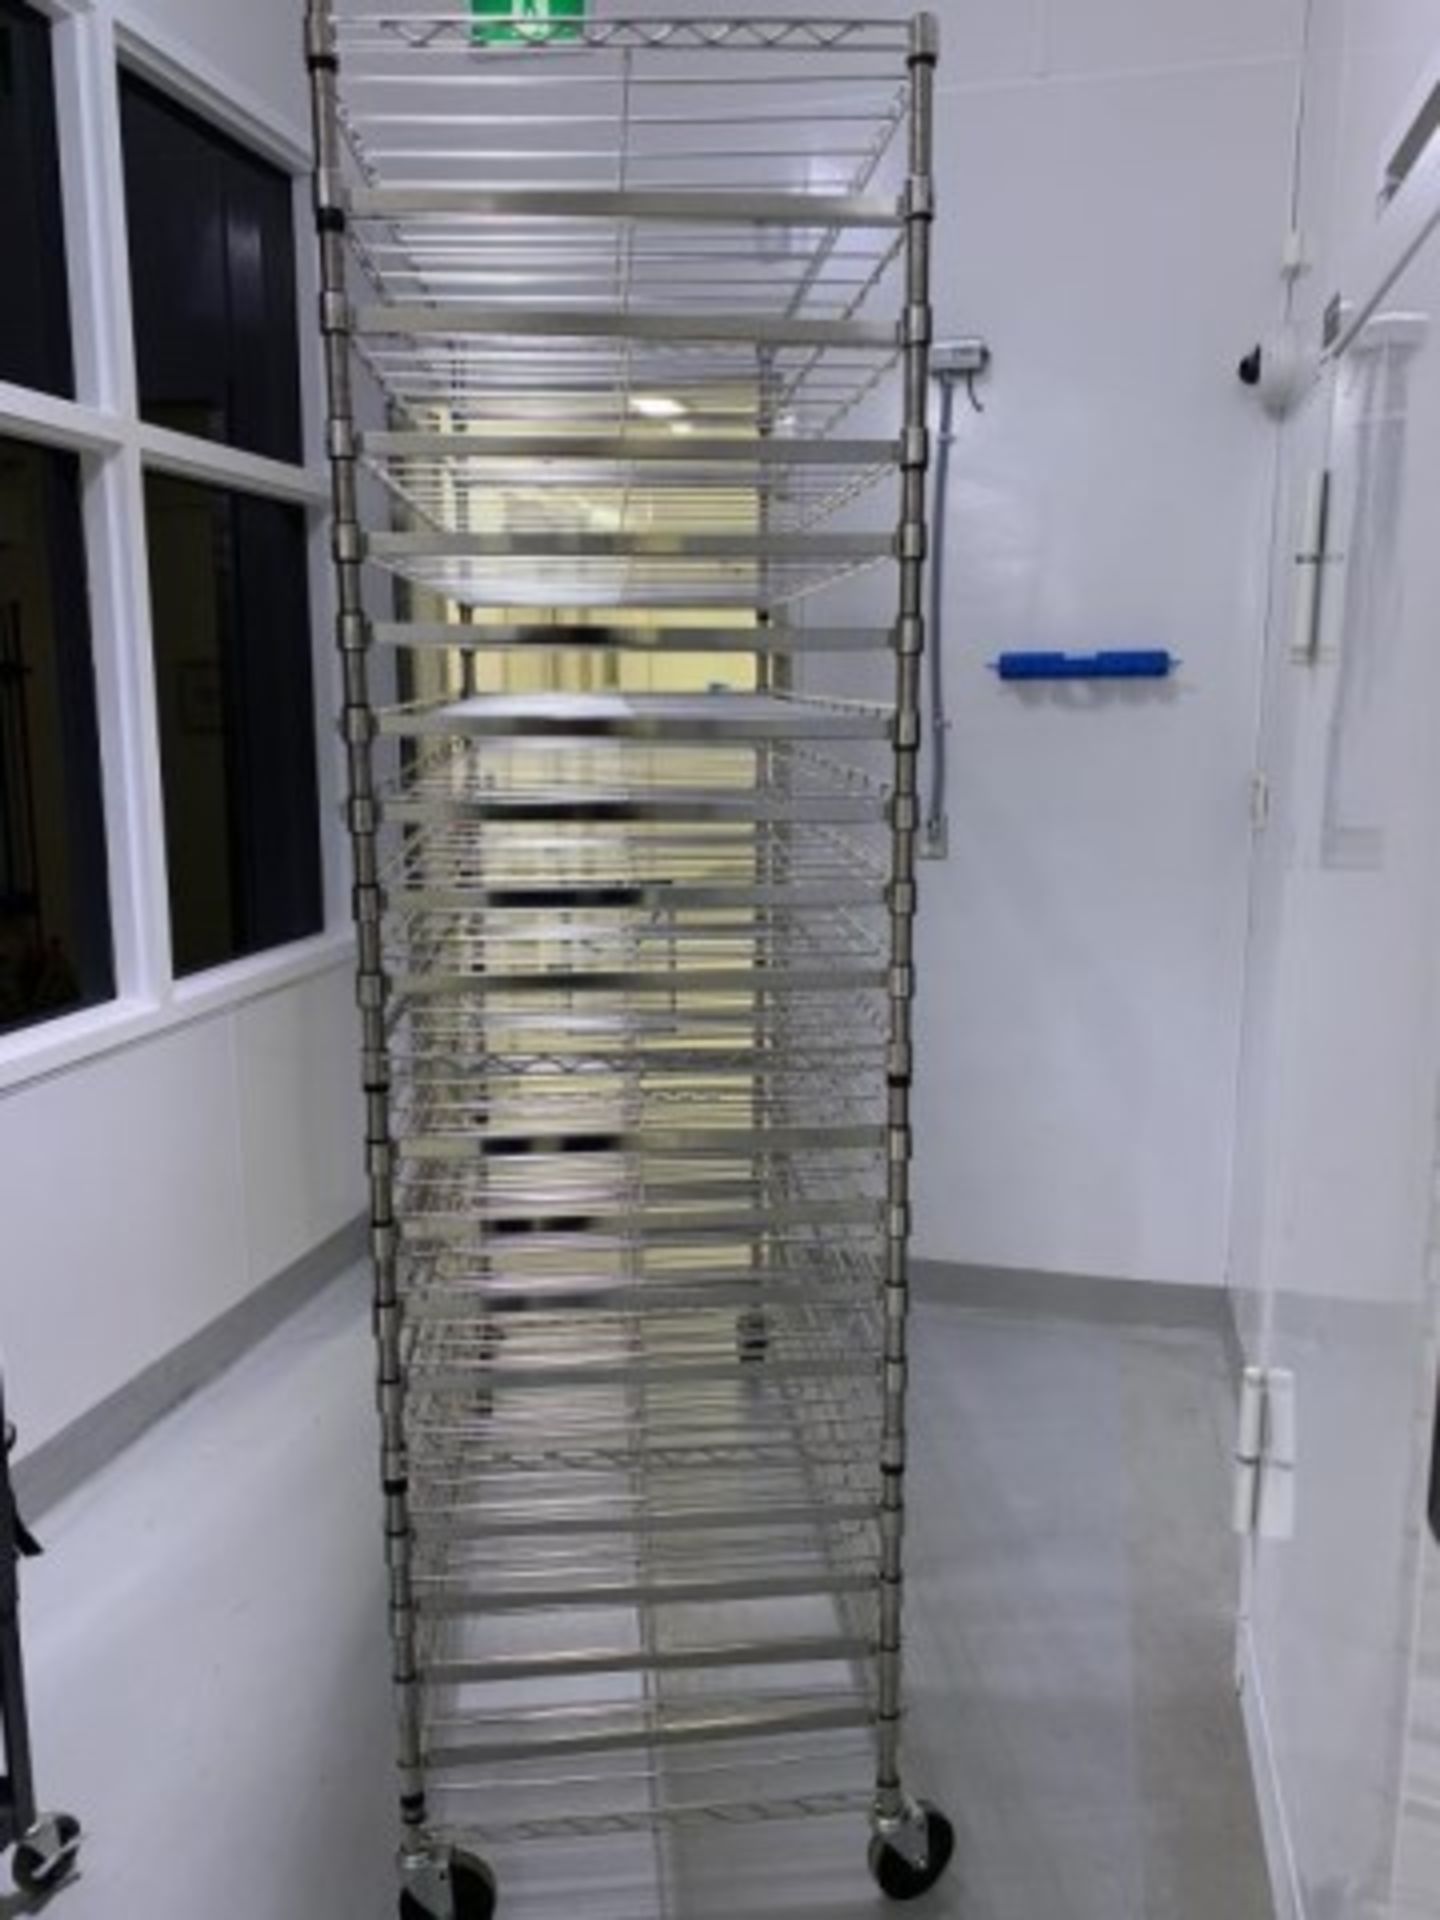 Drying Carts - Image 2 of 2